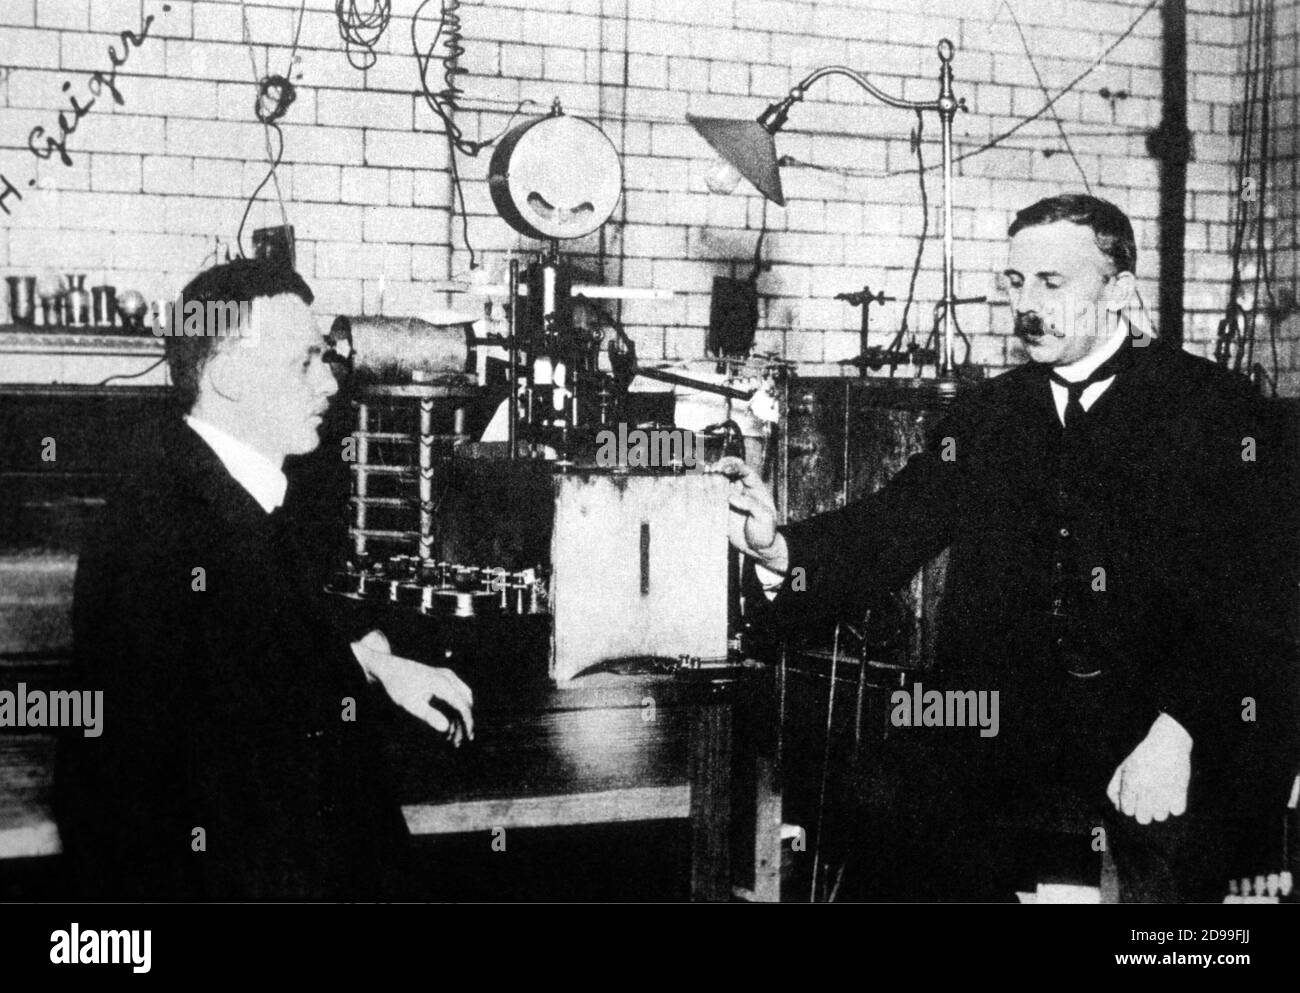 1912 , Cambridge , England : the german  inventor of '  Counter Geiger ' ( 1913 )  HANS GEIGER  ( Neustadt , Germany 1882 - Berlin 1945 ) with ( at right in the photo ) the british physicist Lord ERNEST RUTHEFORD of NELSON  ( Nelson , New Zealand 1871 - Cambridge 1937 ) , discoverer of the ATOMIC MODEL ( 1911 ) with electrons around a nucleus - ATOMIC - ATOMICO - NUCLEO - ELETTRONI - RADIOATTIVITA' - RADIOACTIVITY - FISICA - FISICO - PHYSICS - GENIO -----  Archivio GBB Stock Photo